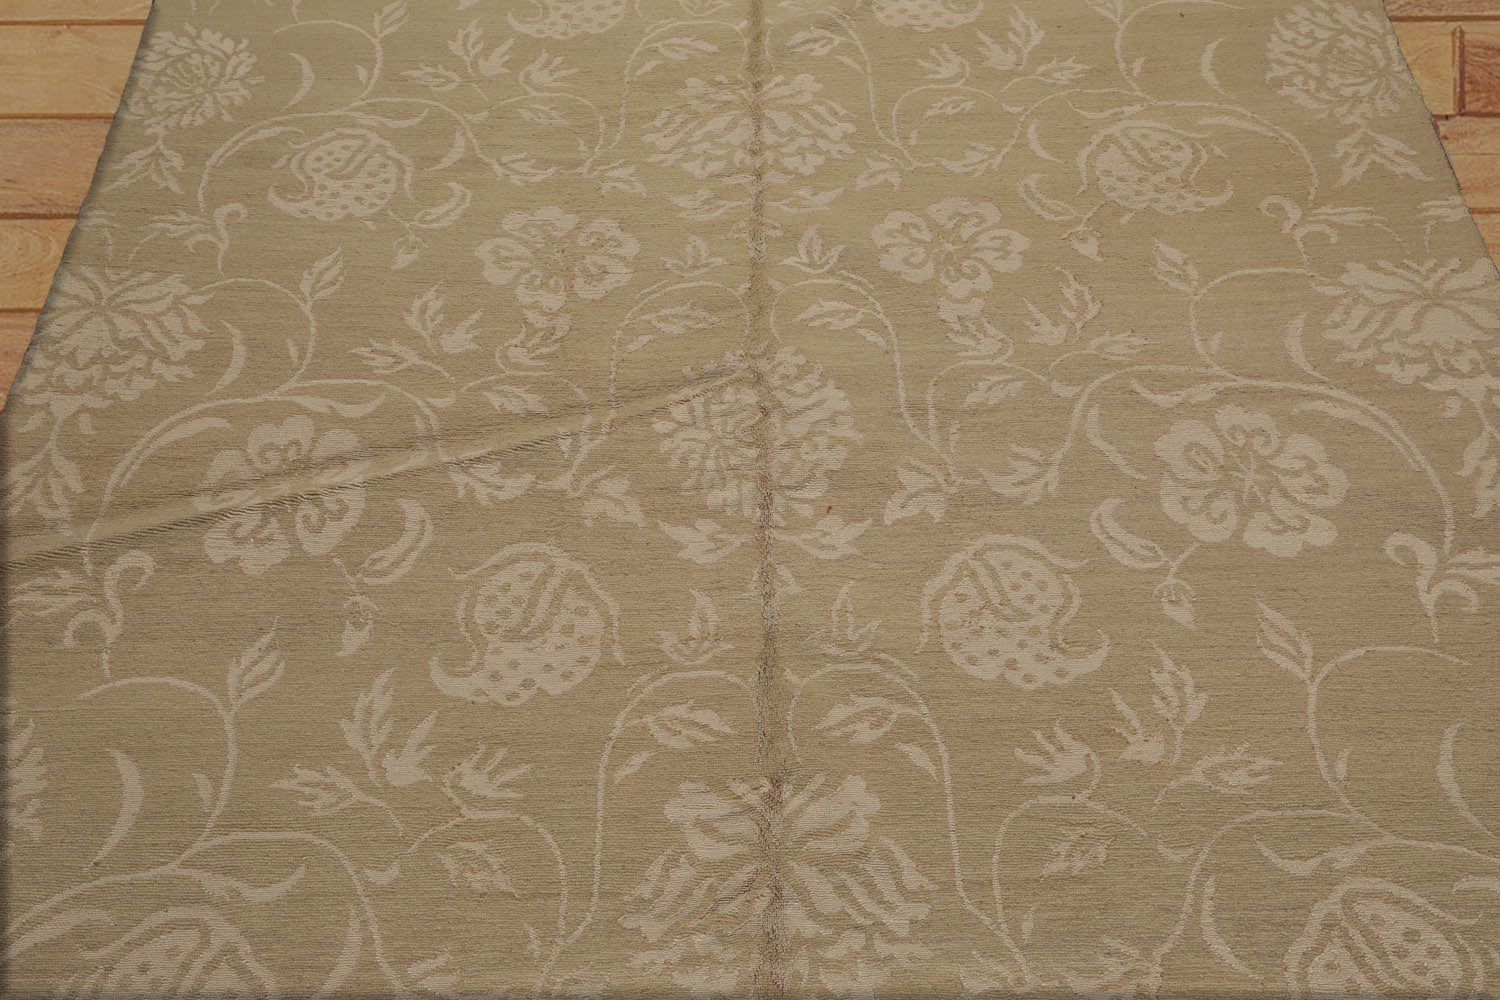 Elyanah 6x9 Hand Knotted Tibetan Wool and Silk Lapchi Scroll Transitional Oriental Area Rug Tone On Tone Beige Color